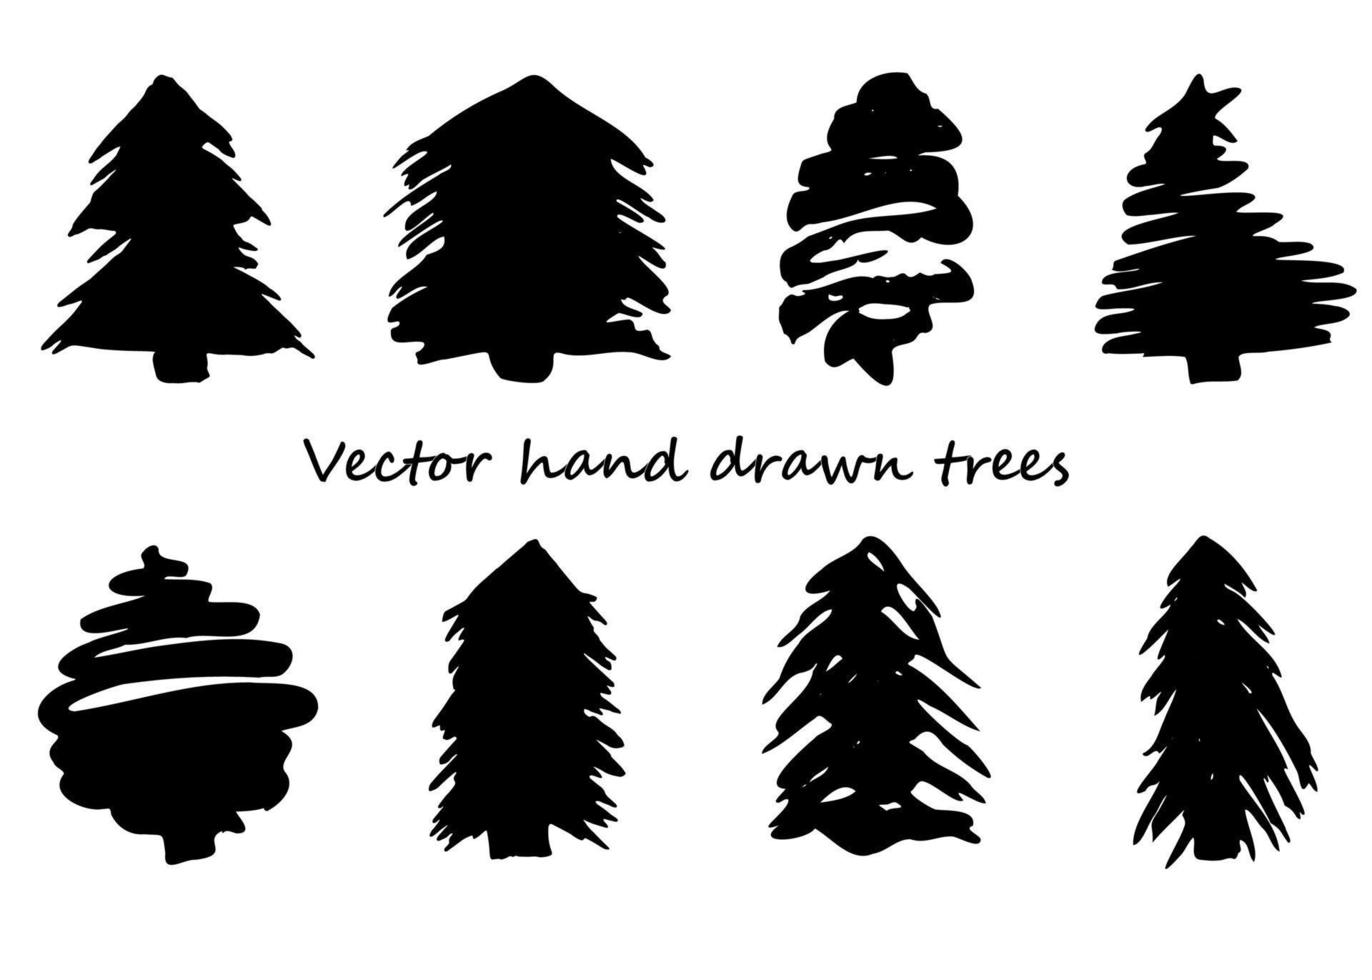 The silhouette of a hand-drawn Christmas tree. Black outline, isolated on white vector